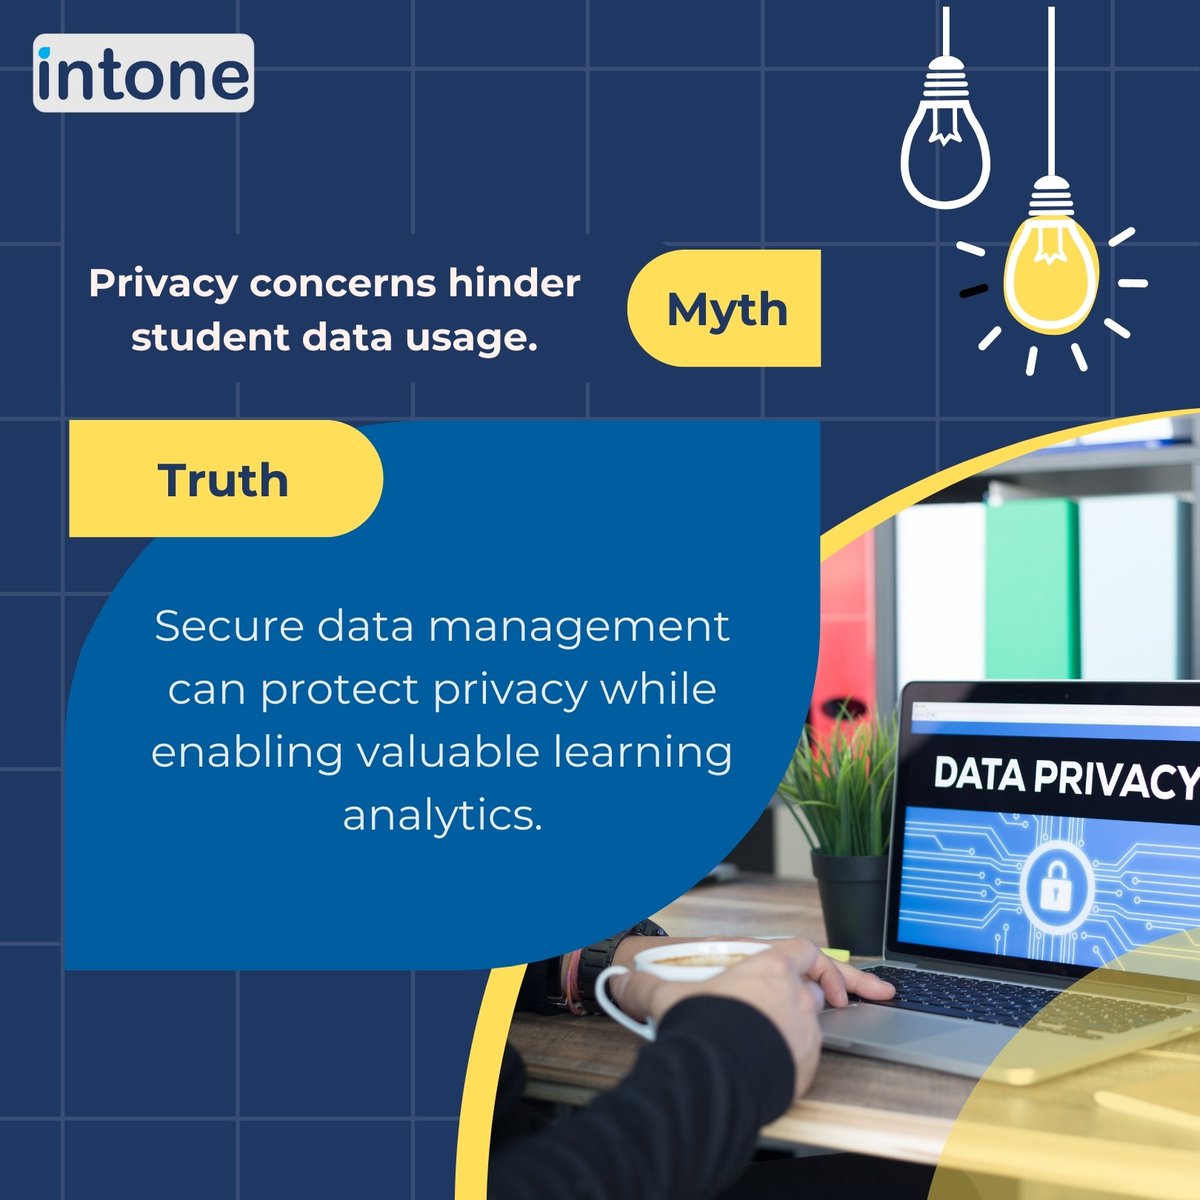 Education tech: Secure data management unlocks learning analytics' power (protecting student privacy) for informed teaching & improved learning outcomes.

#internalcontrols #riskmanagement #continuousmonitoring #automation #regulatorycompliance #internalaudit